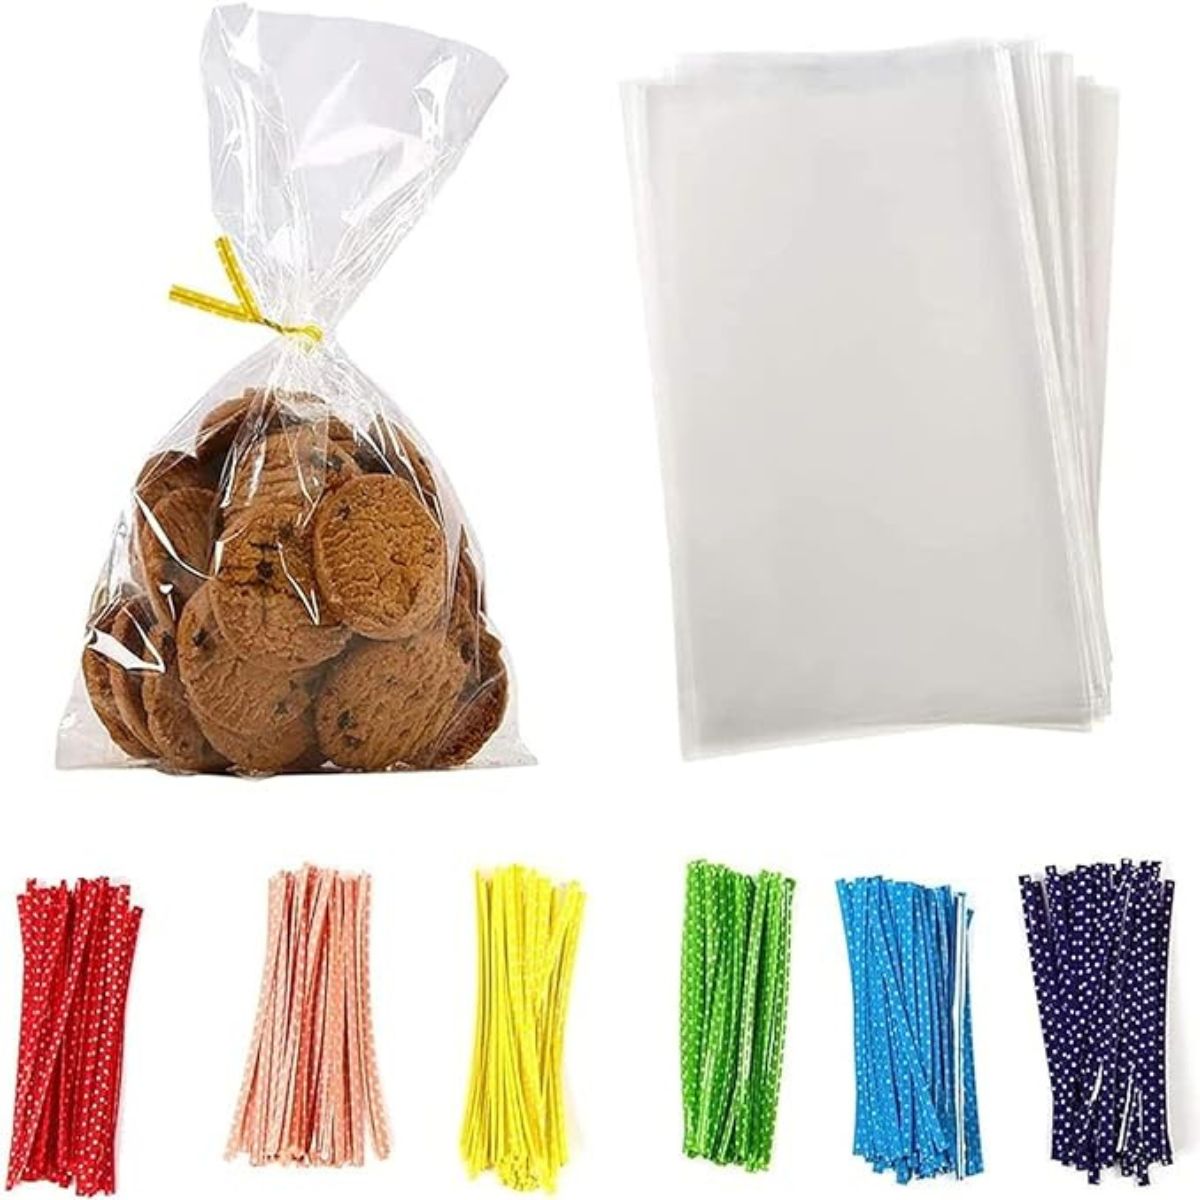 6x8 Inches Simple Treat Bags 100 pcs